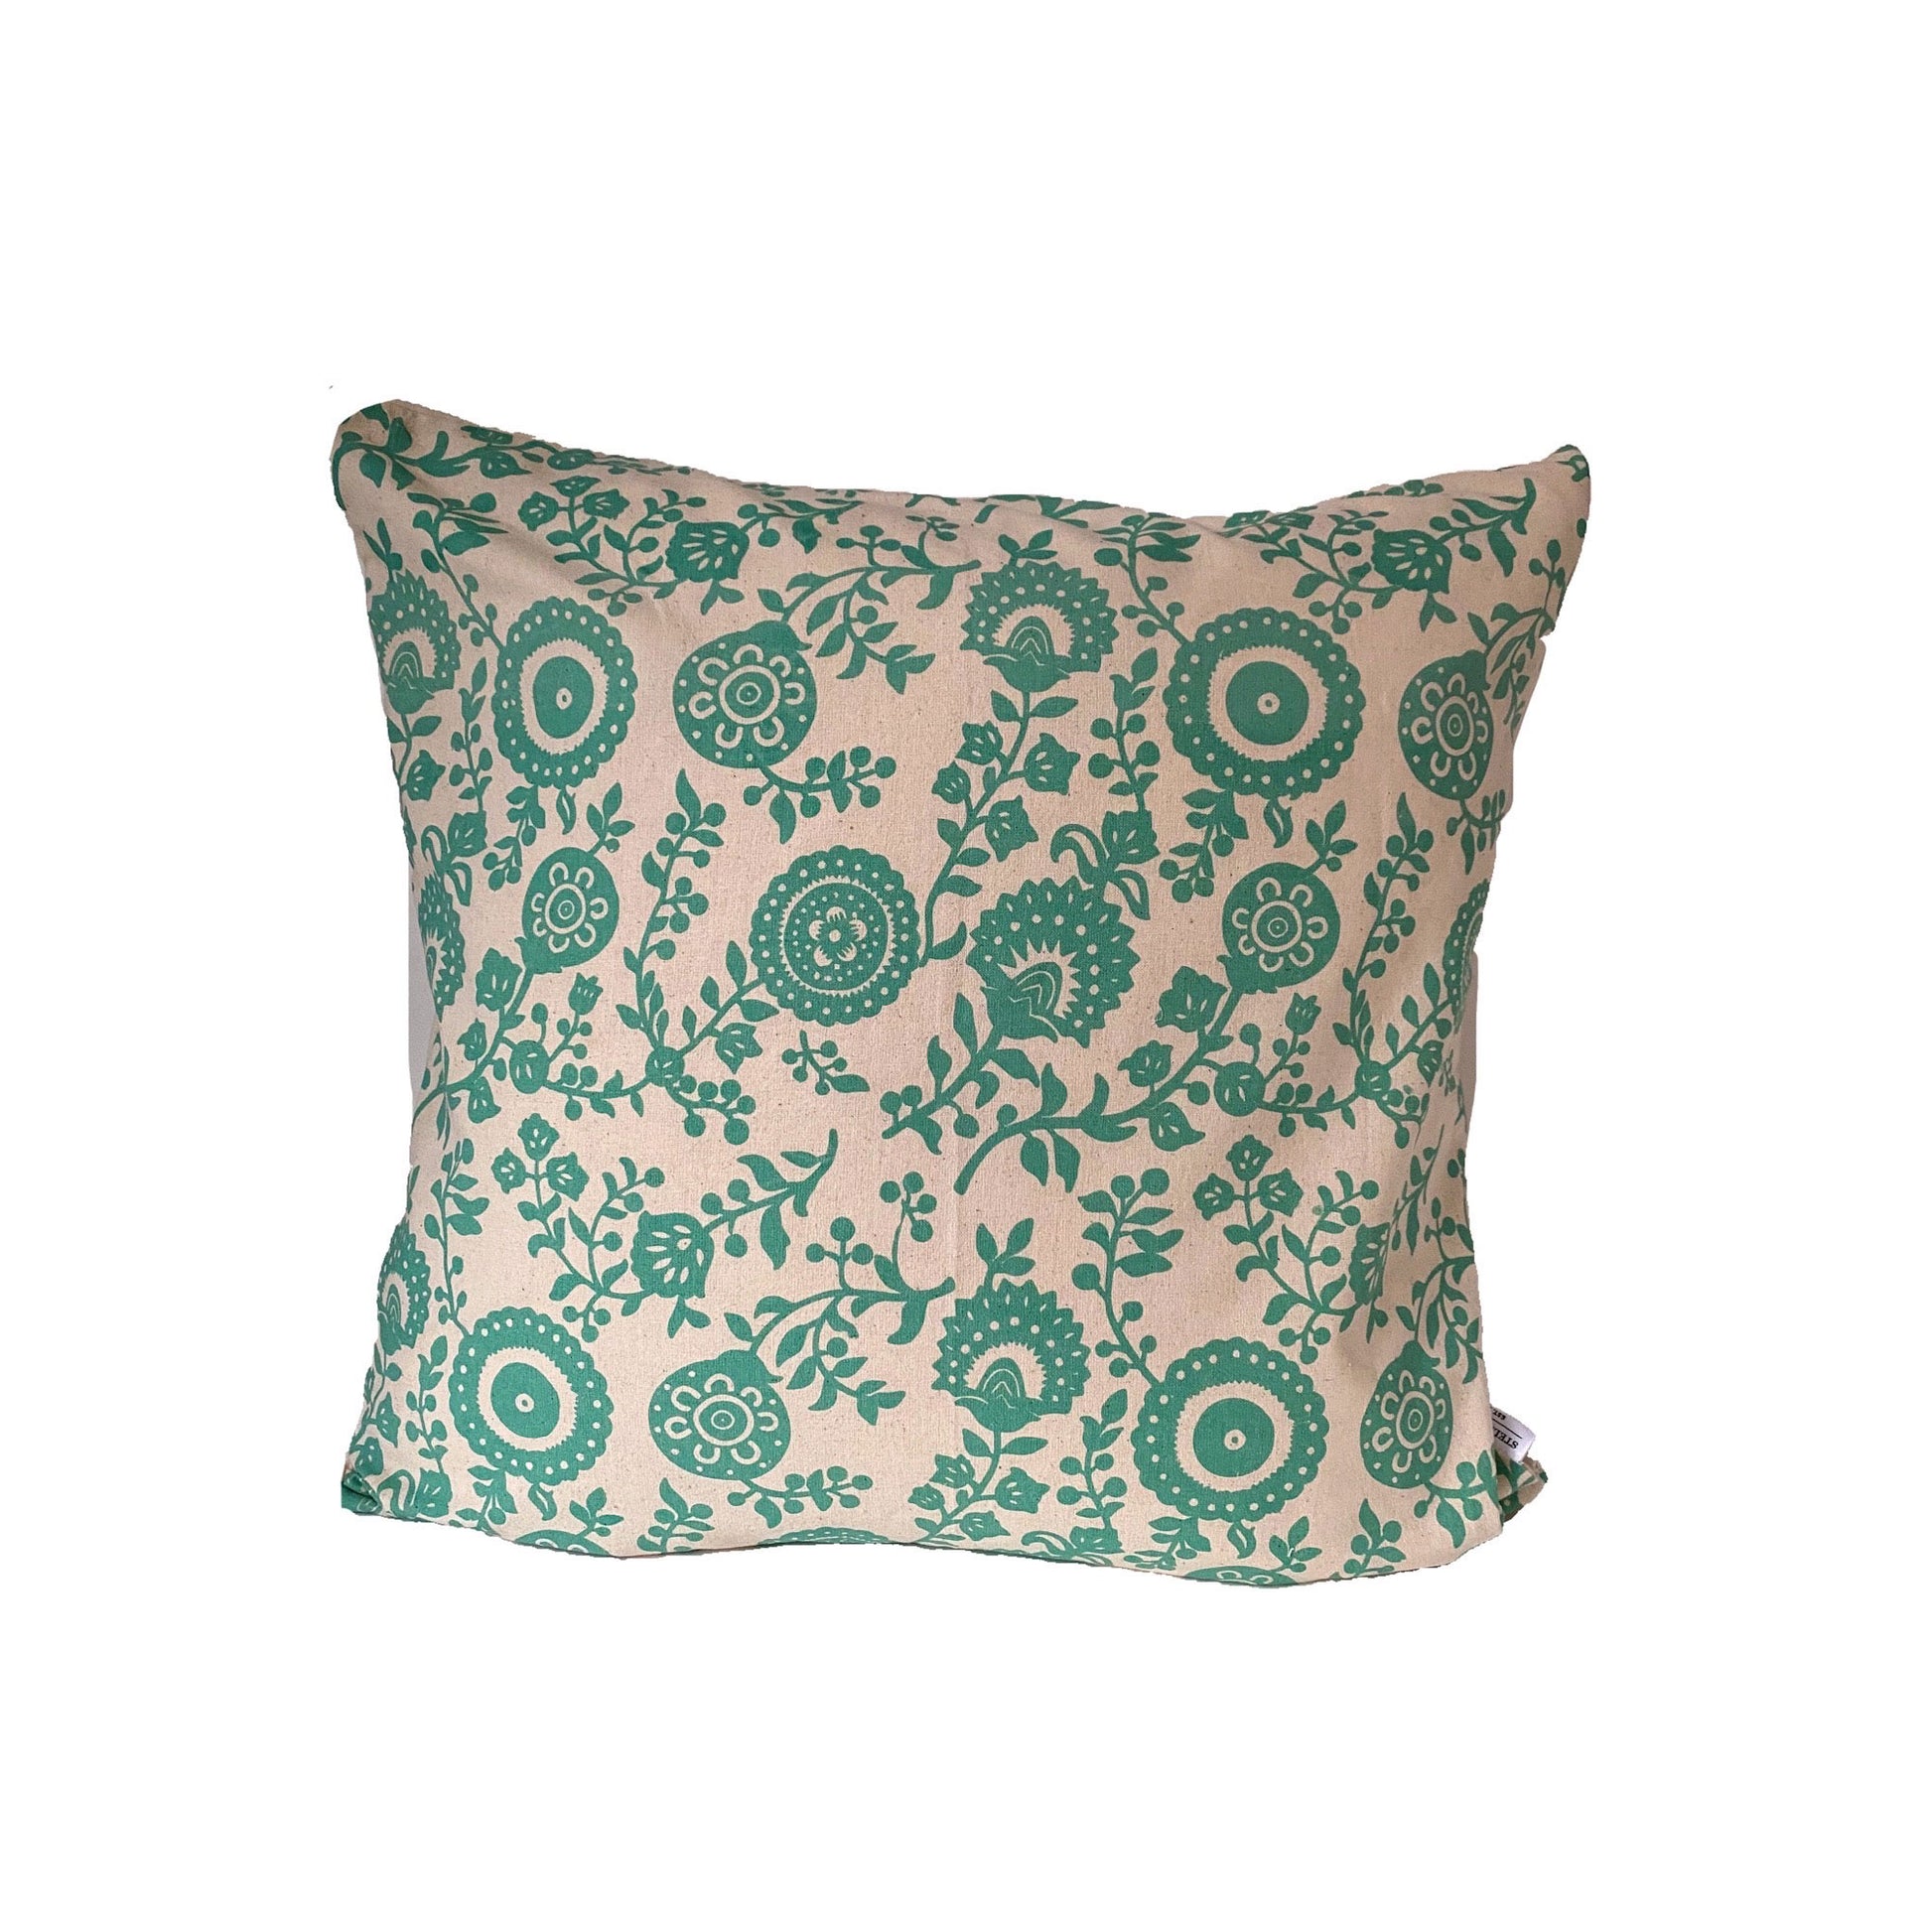 Stella Decor cushion cover design of chrysanthemum flower in size 50x50 cm in color turquoise